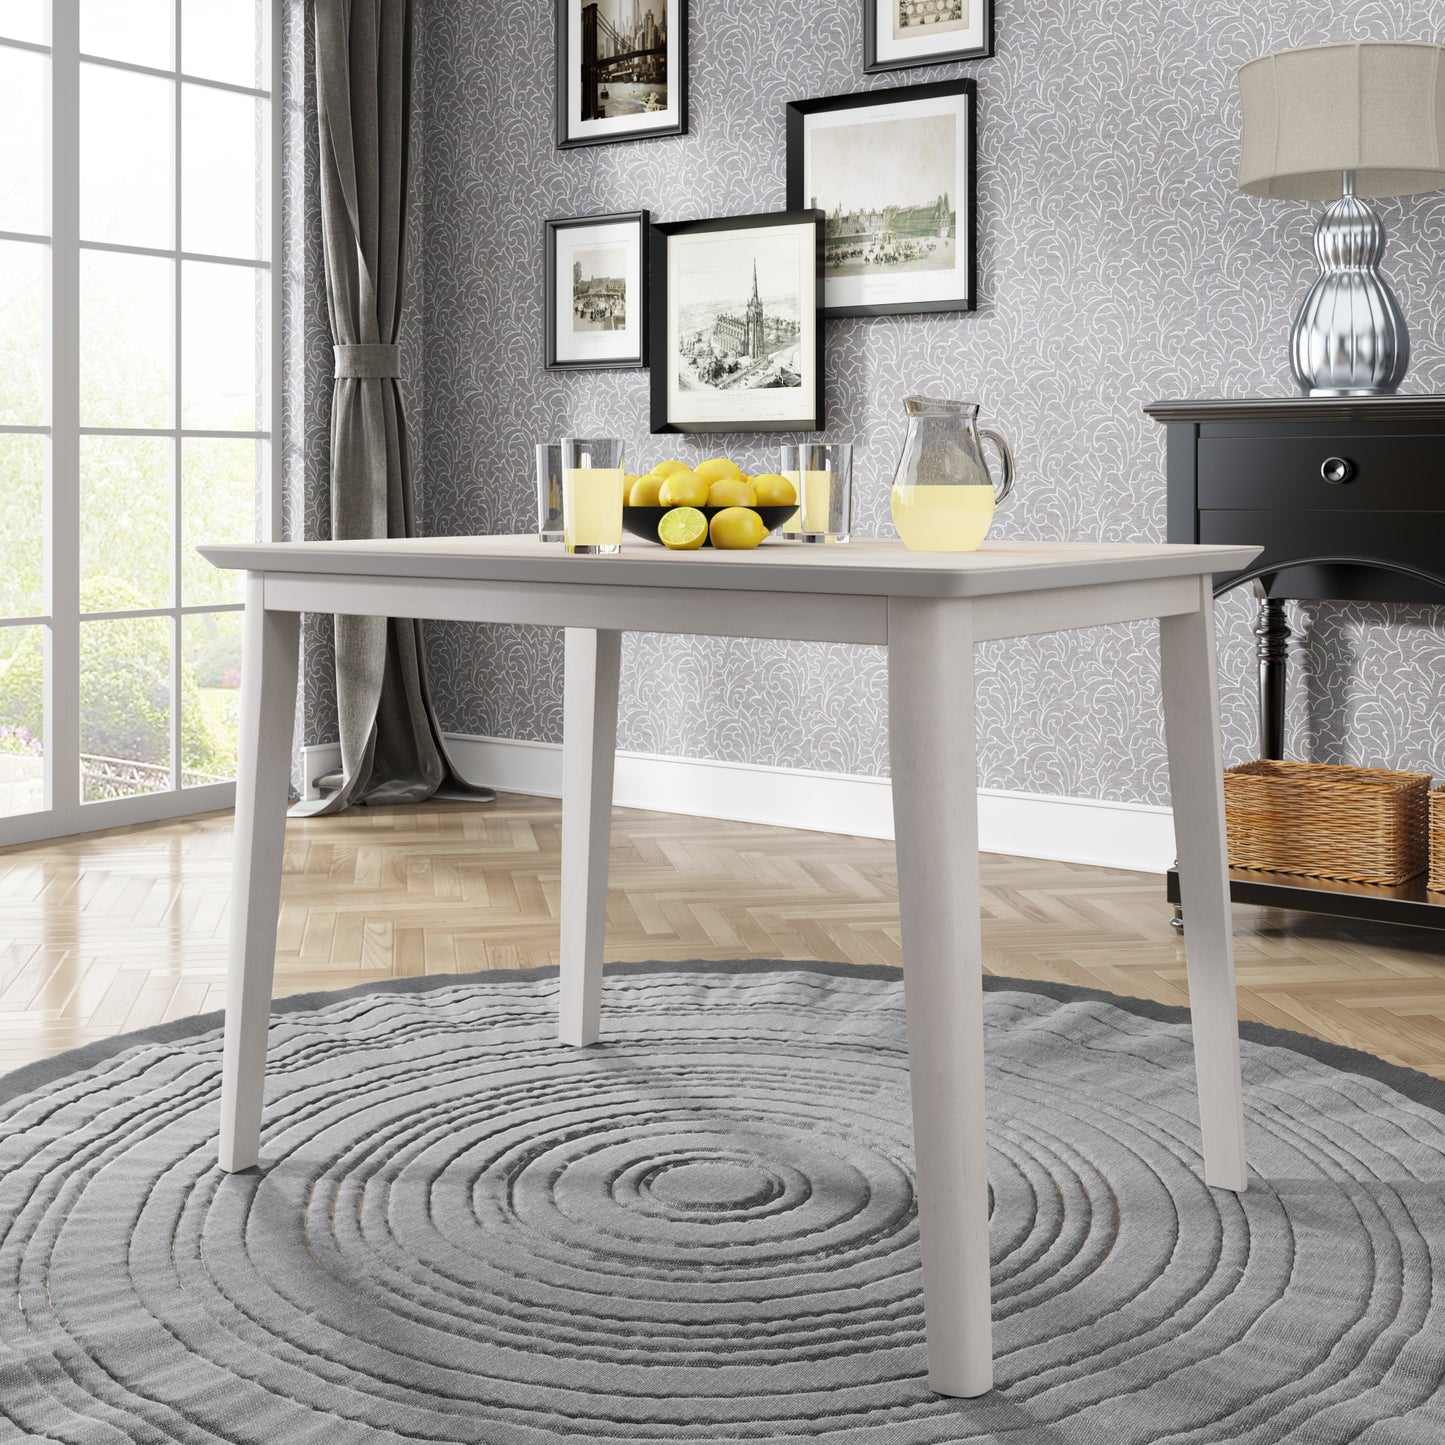 Farmhouse Rustic WoodKitchen Dining Table,Light Grey+White